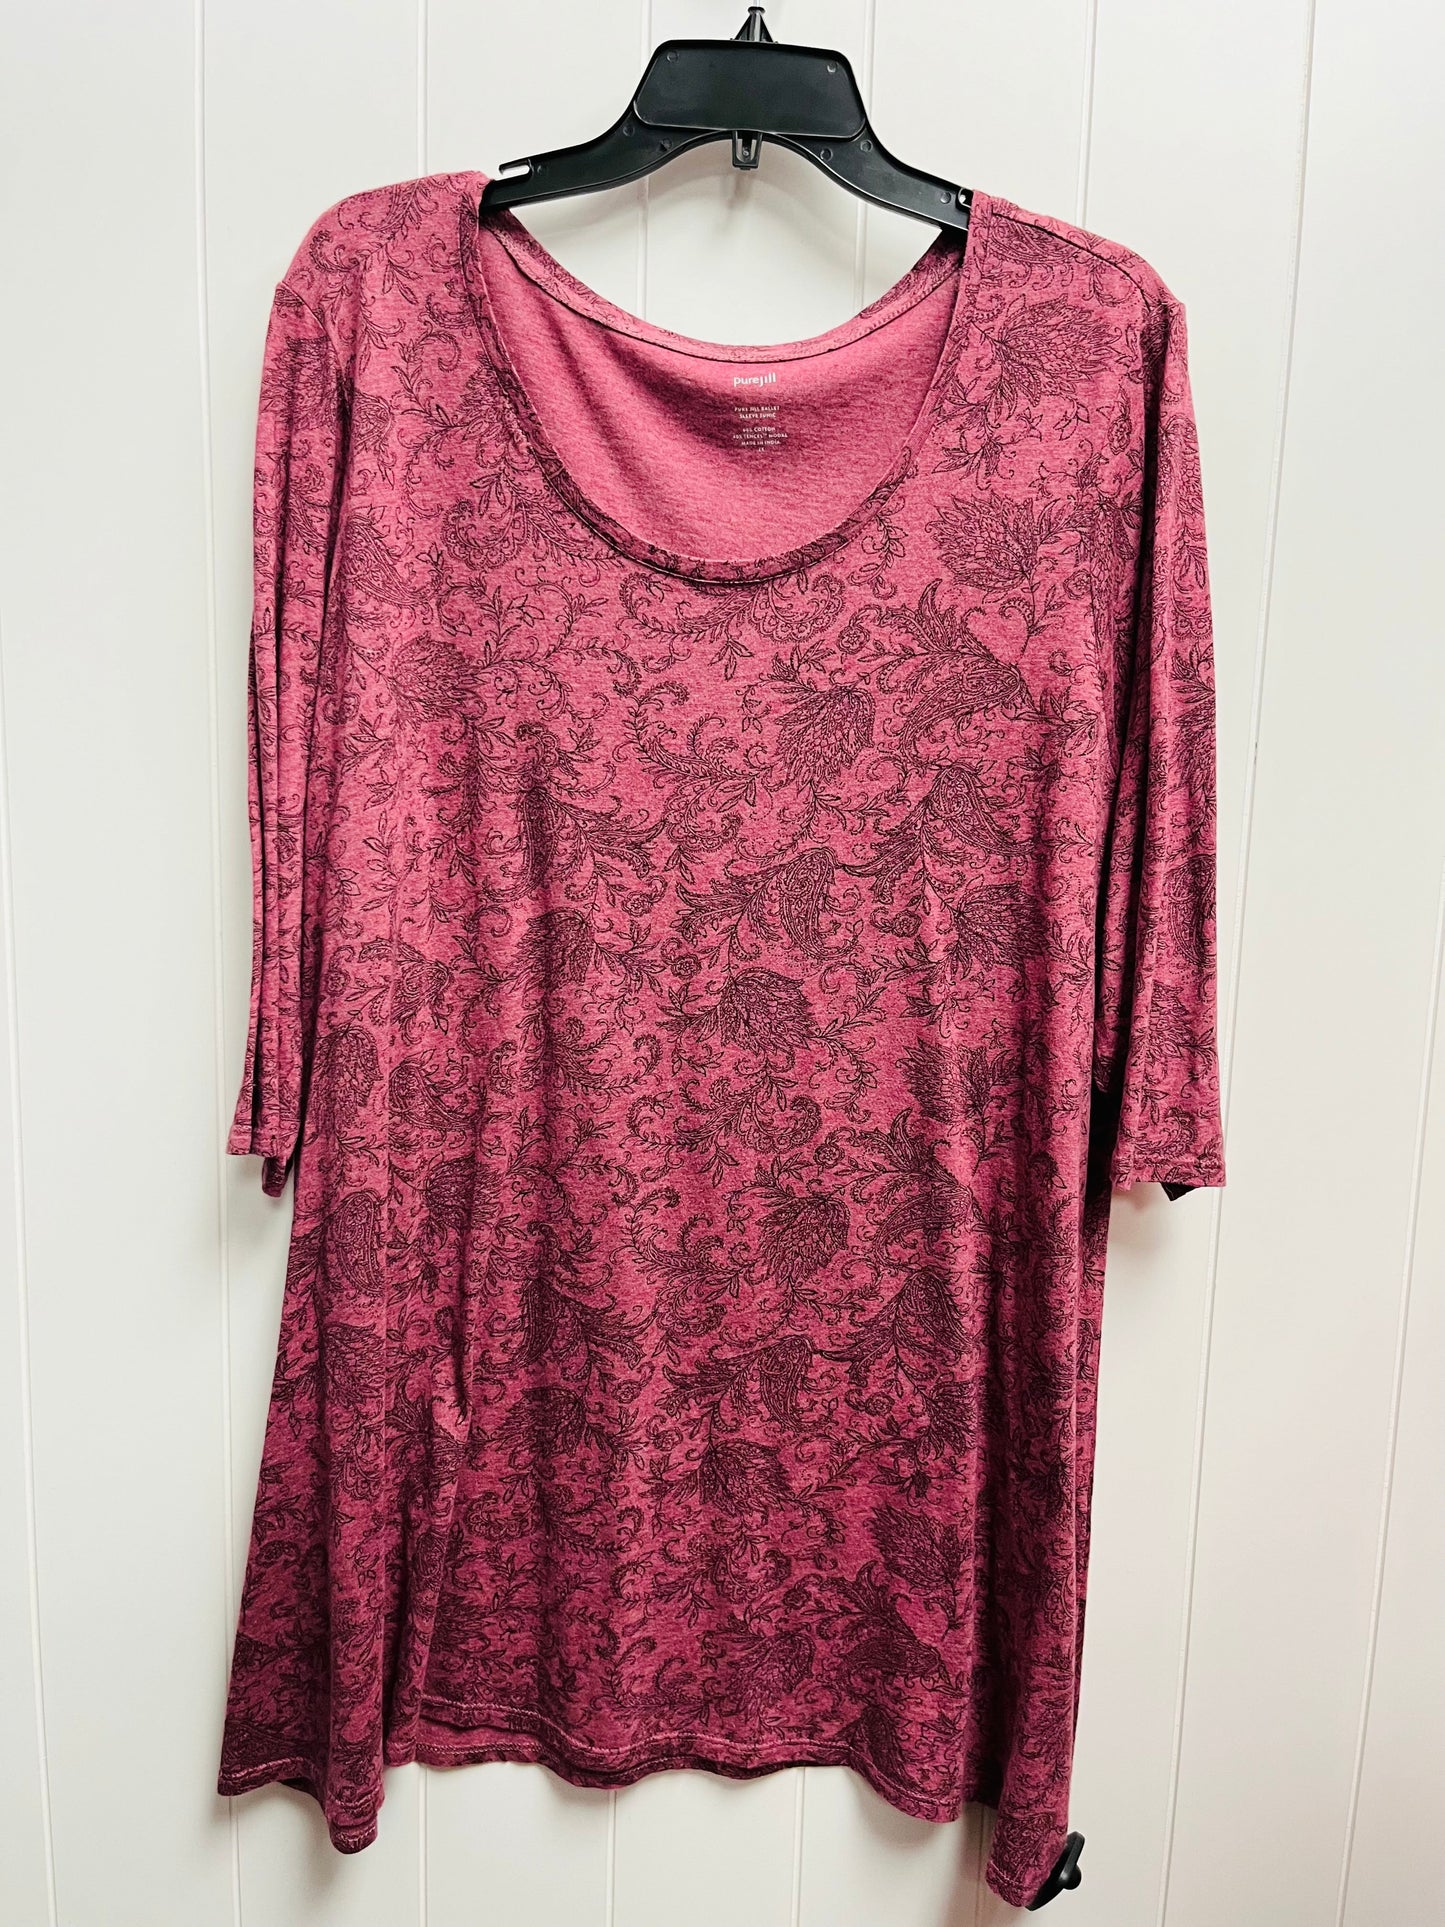 Top Long Sleeve By Pure Jill  Size: 2x